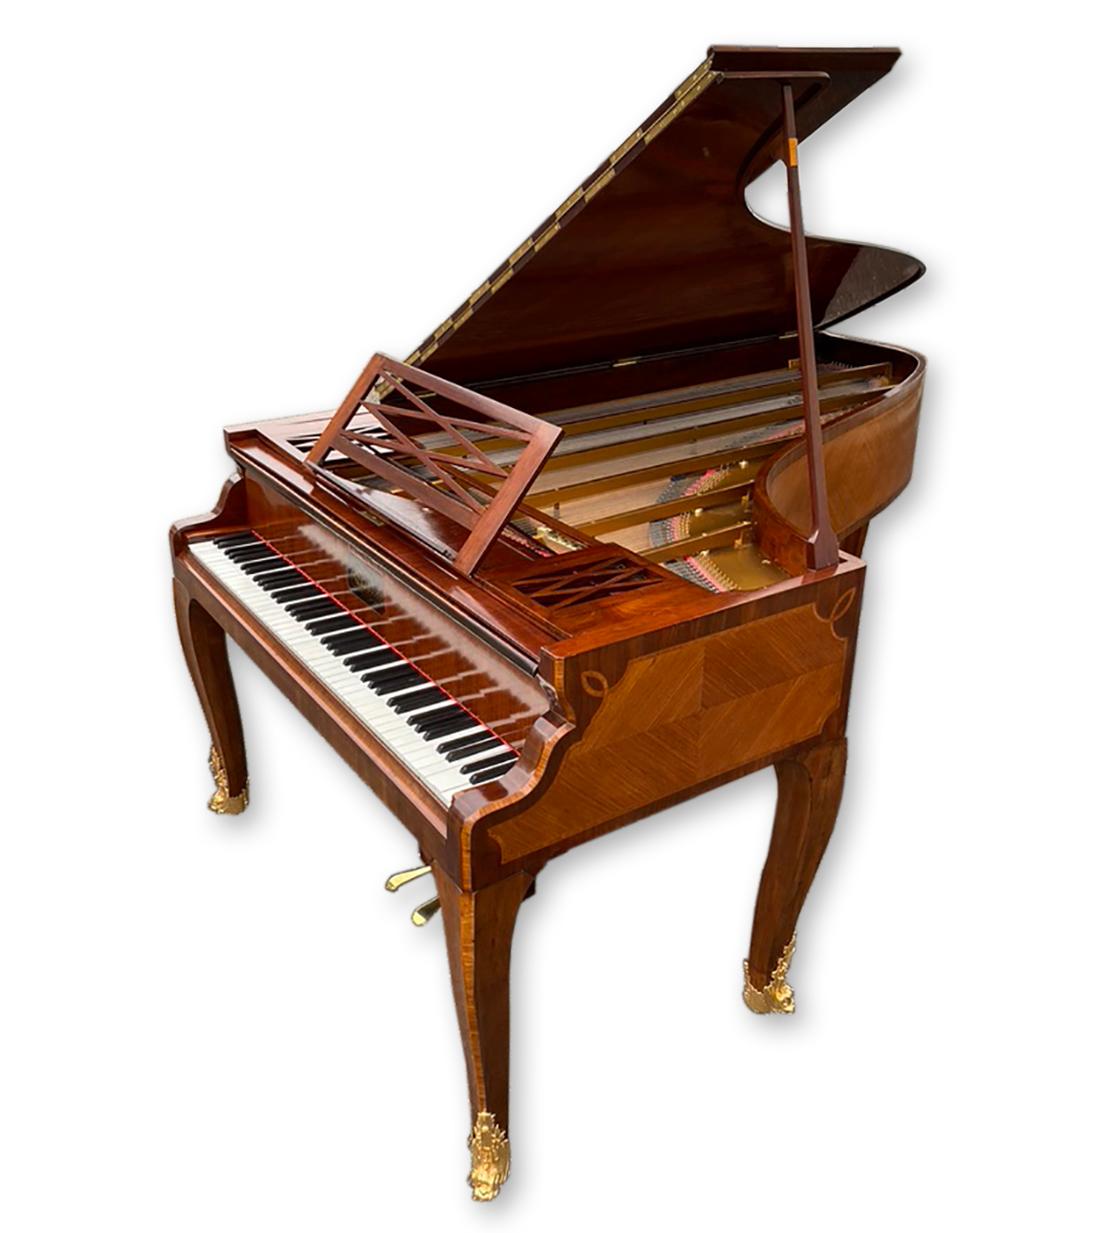 Art cased grand piano by Erard Paris
Serial number 19924 
Case Paris 1877
Designed by Mercier Frères Paris with a design specified by order.
Restored to perfection by our German piano master team. For stable tuning, the pinblock has been